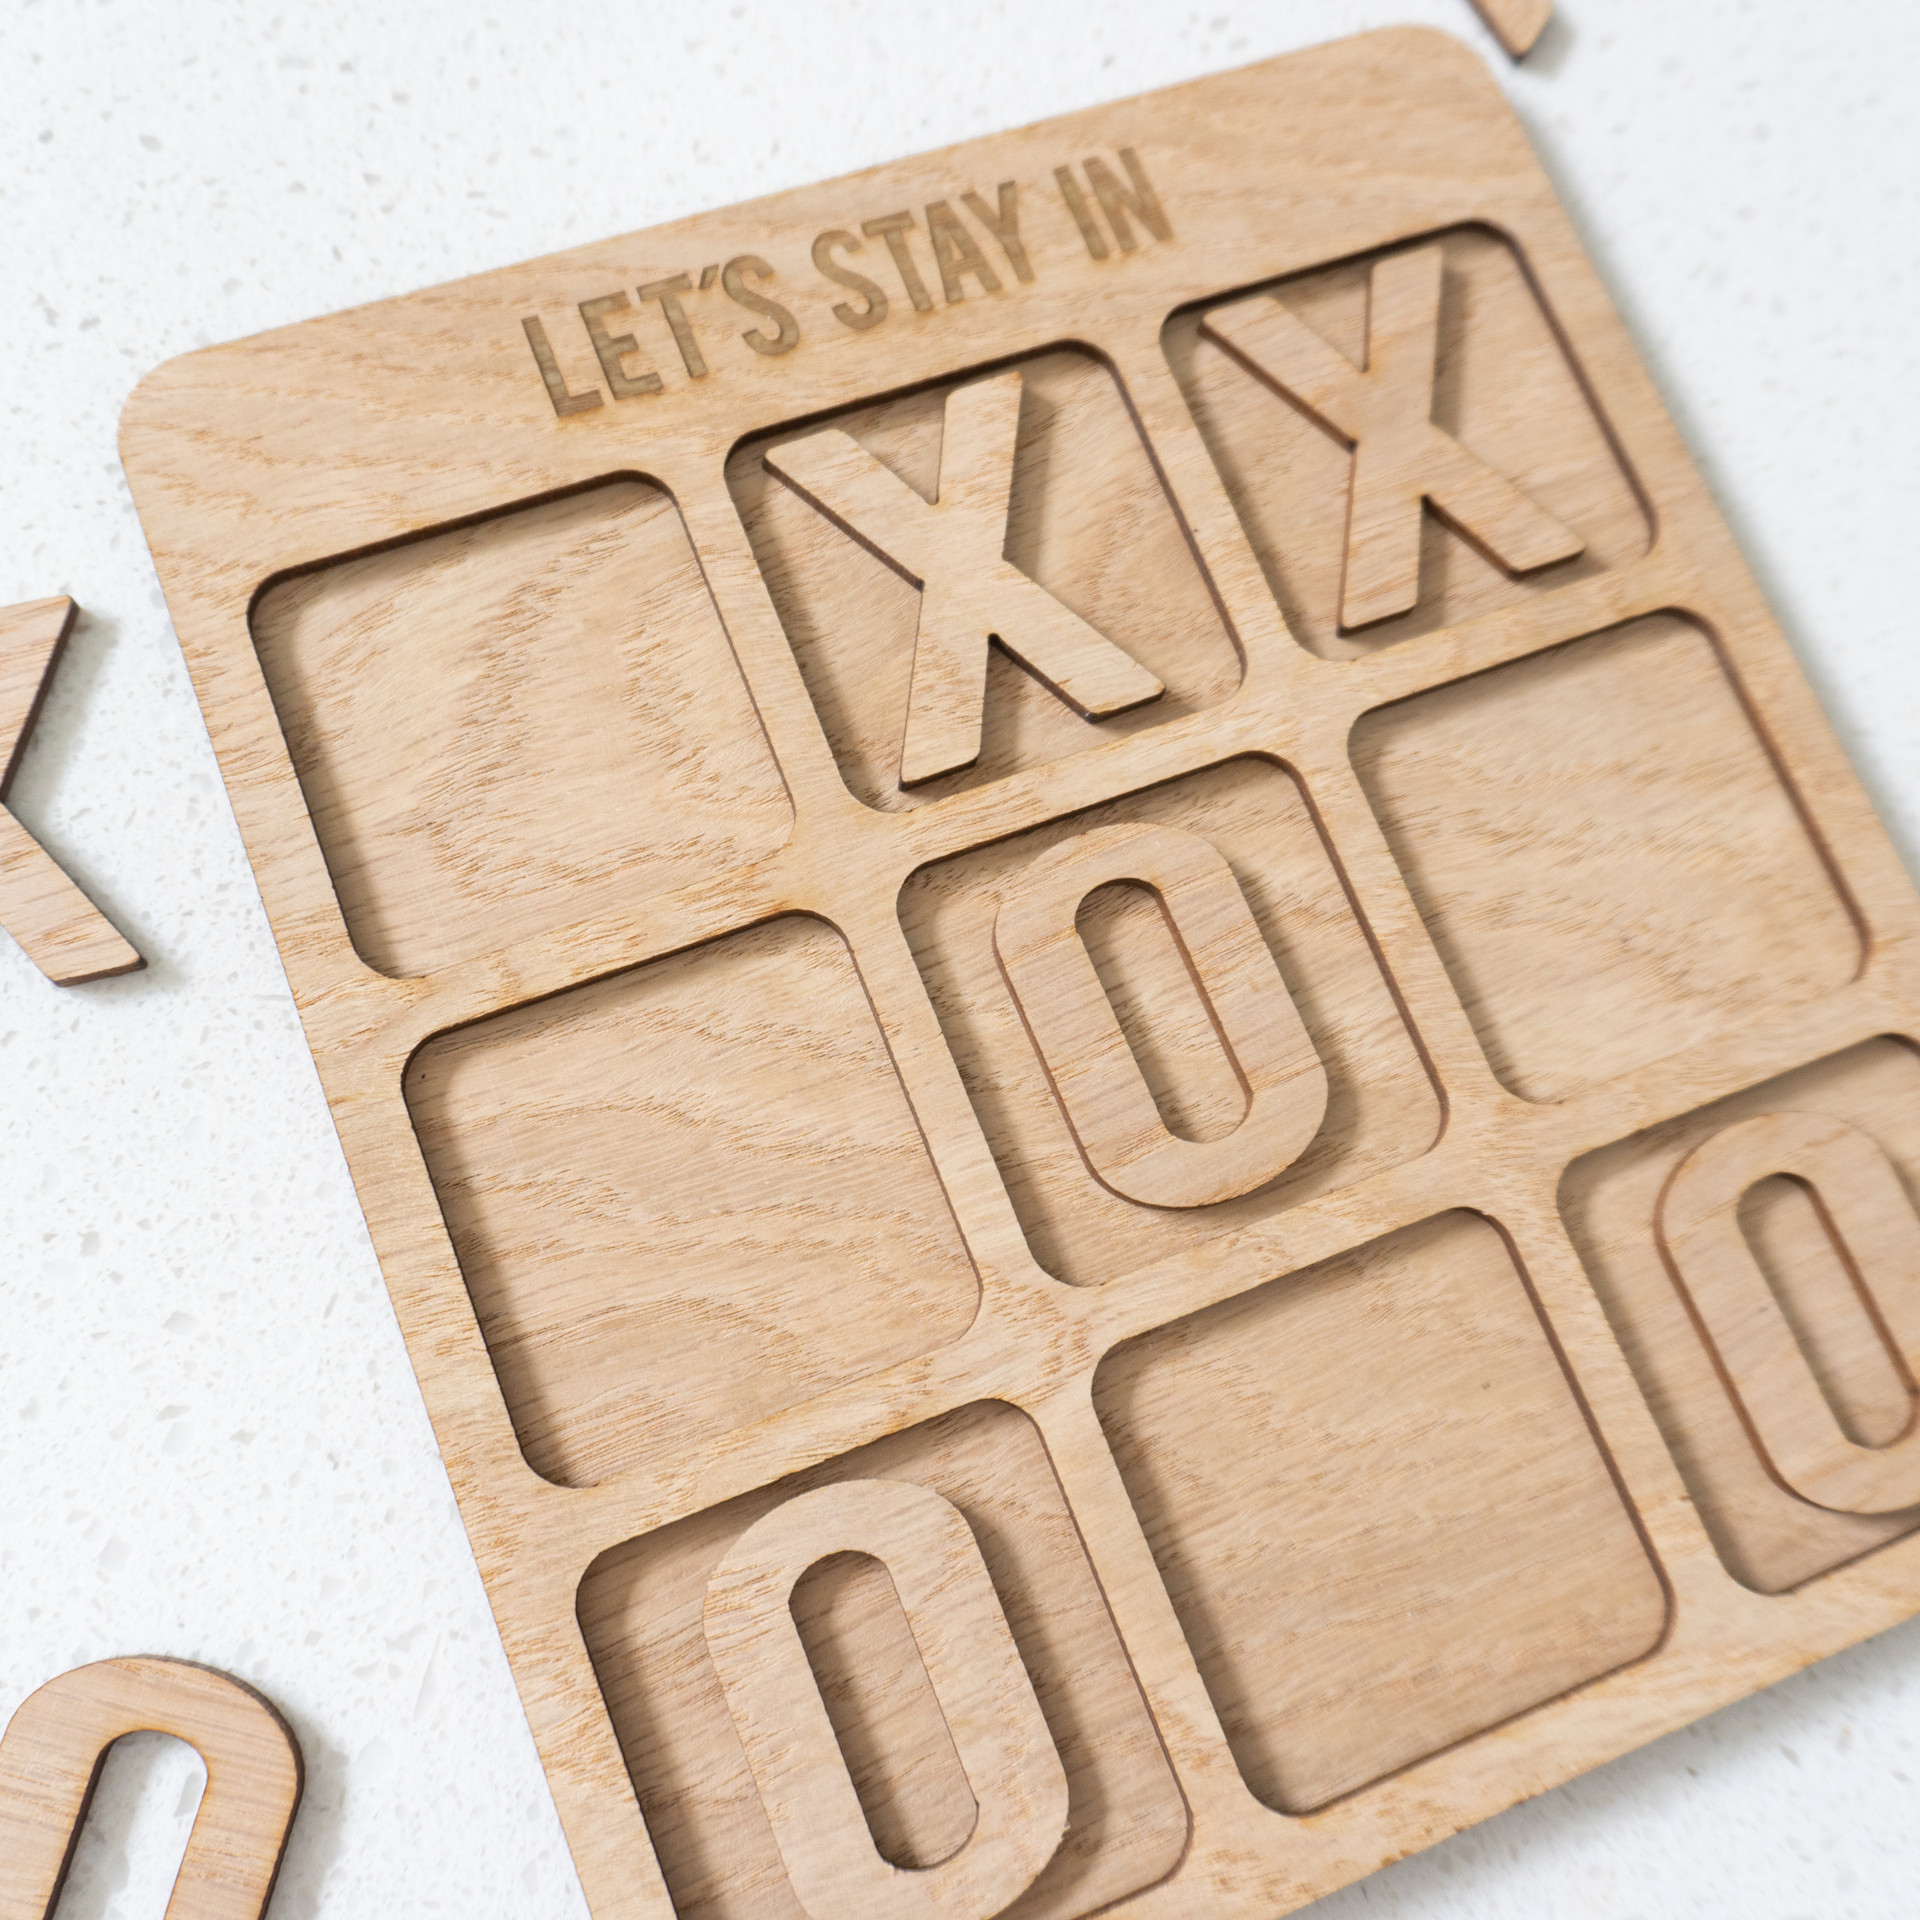 Let's Stay In Wooden Tic Tac Toe Board